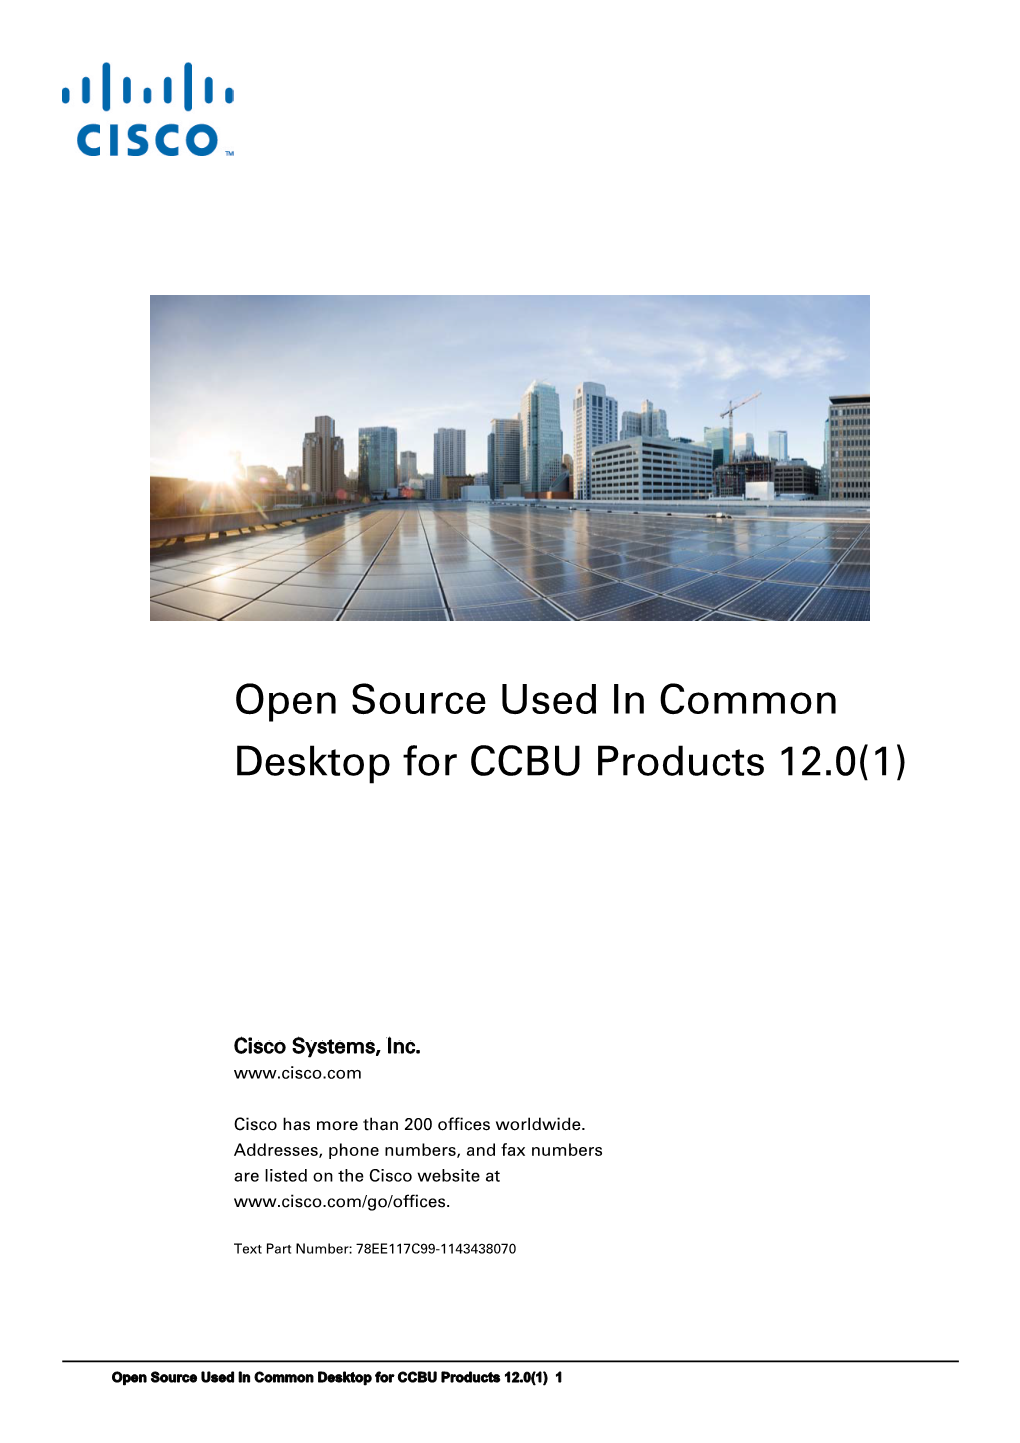 Open Source Used in Common Desktop for CCBU Products 12.0(1)